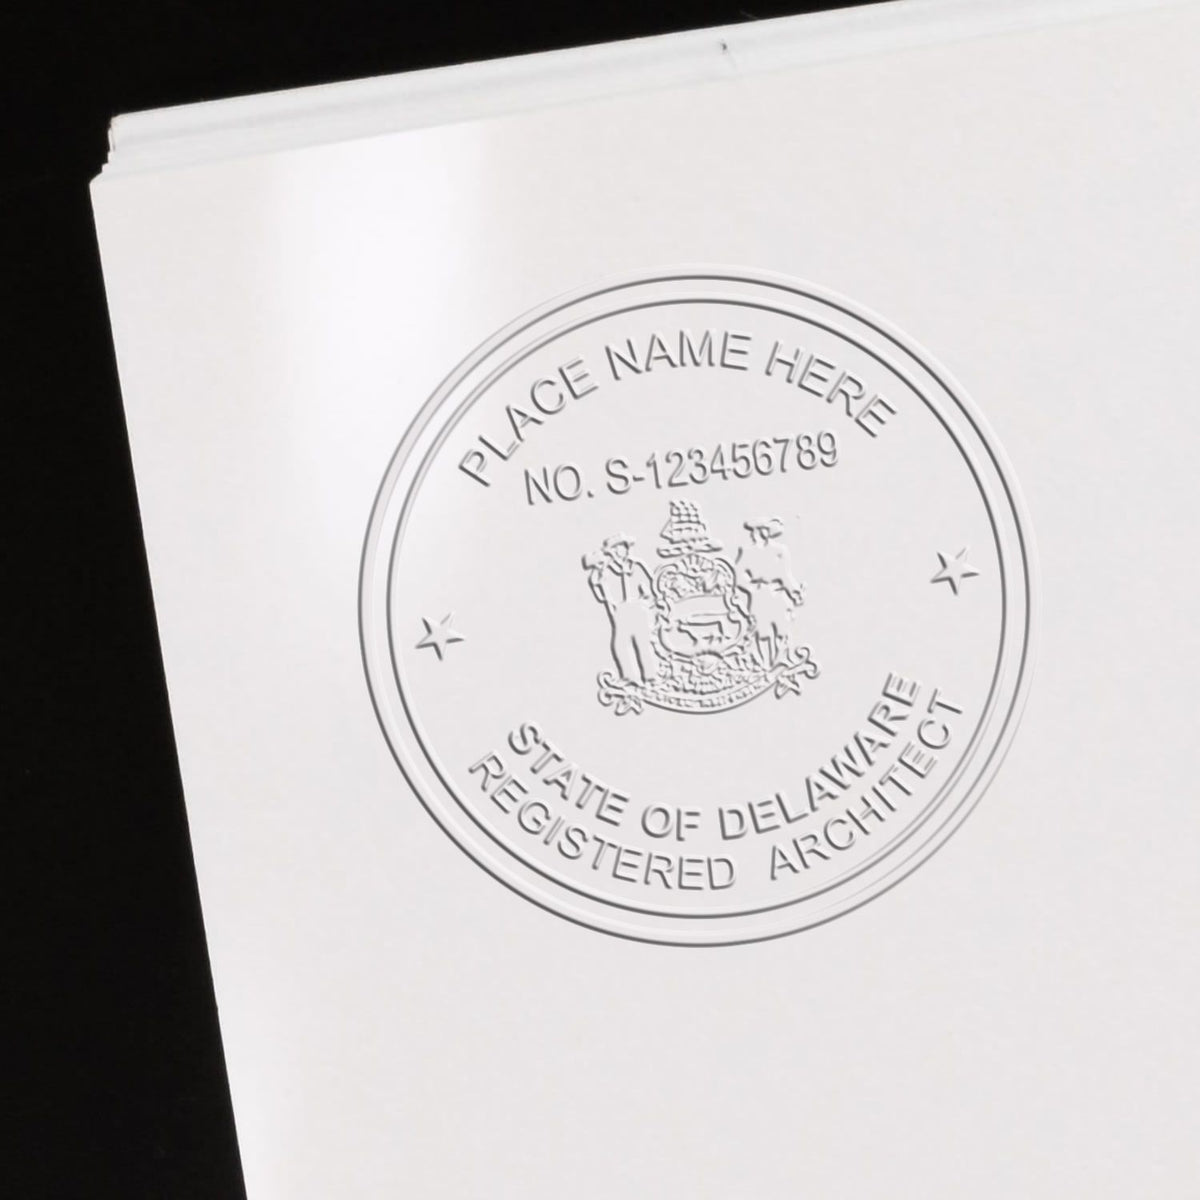 A stamped impression of the Delaware Desk Architect Embossing Seal in this stylish lifestyle photo, setting the tone for a unique and personalized product.